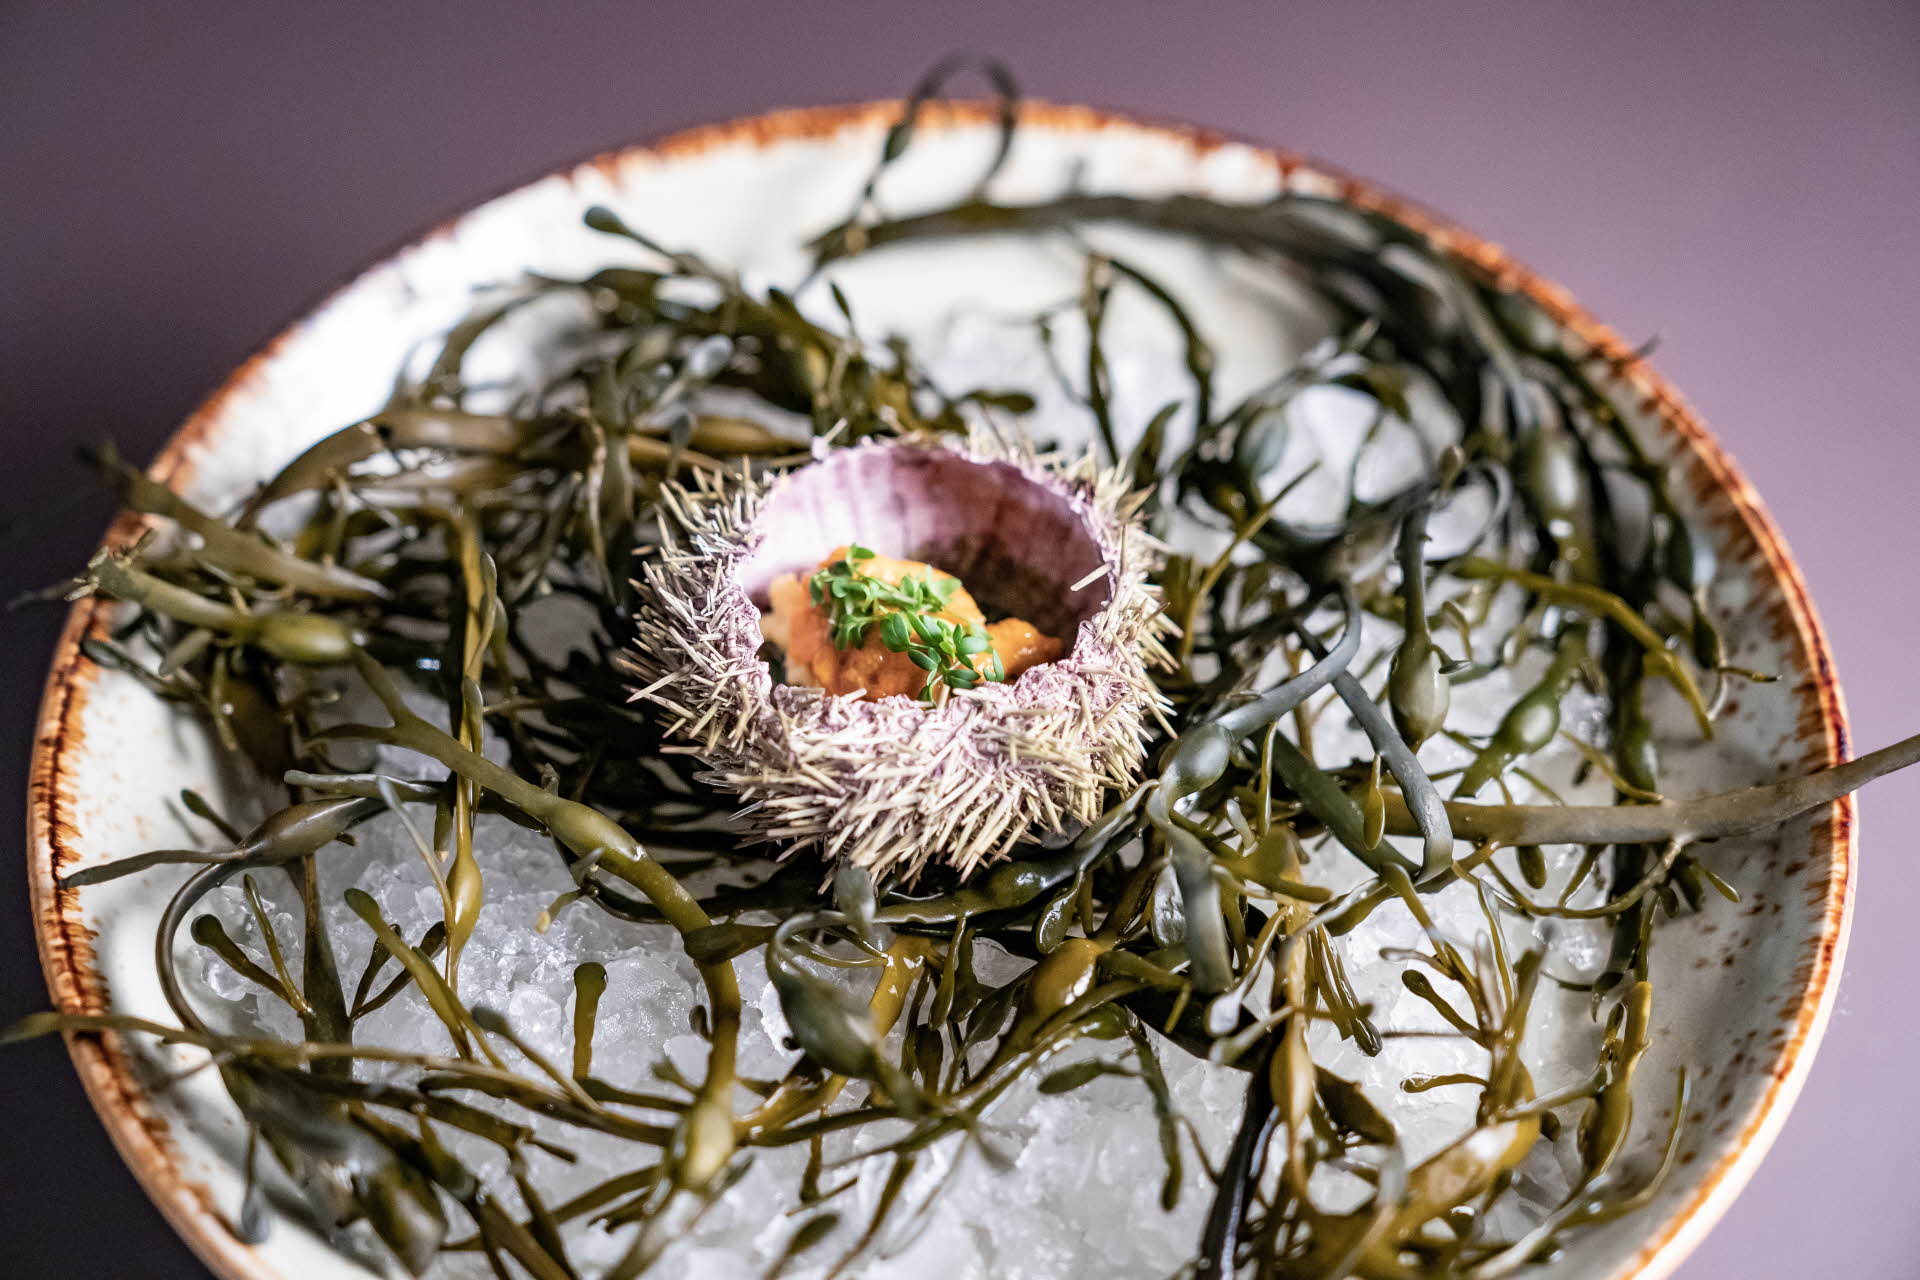 Urchin on a plate of ice and seaweed on Fretheim Hotel's restaurant Arven